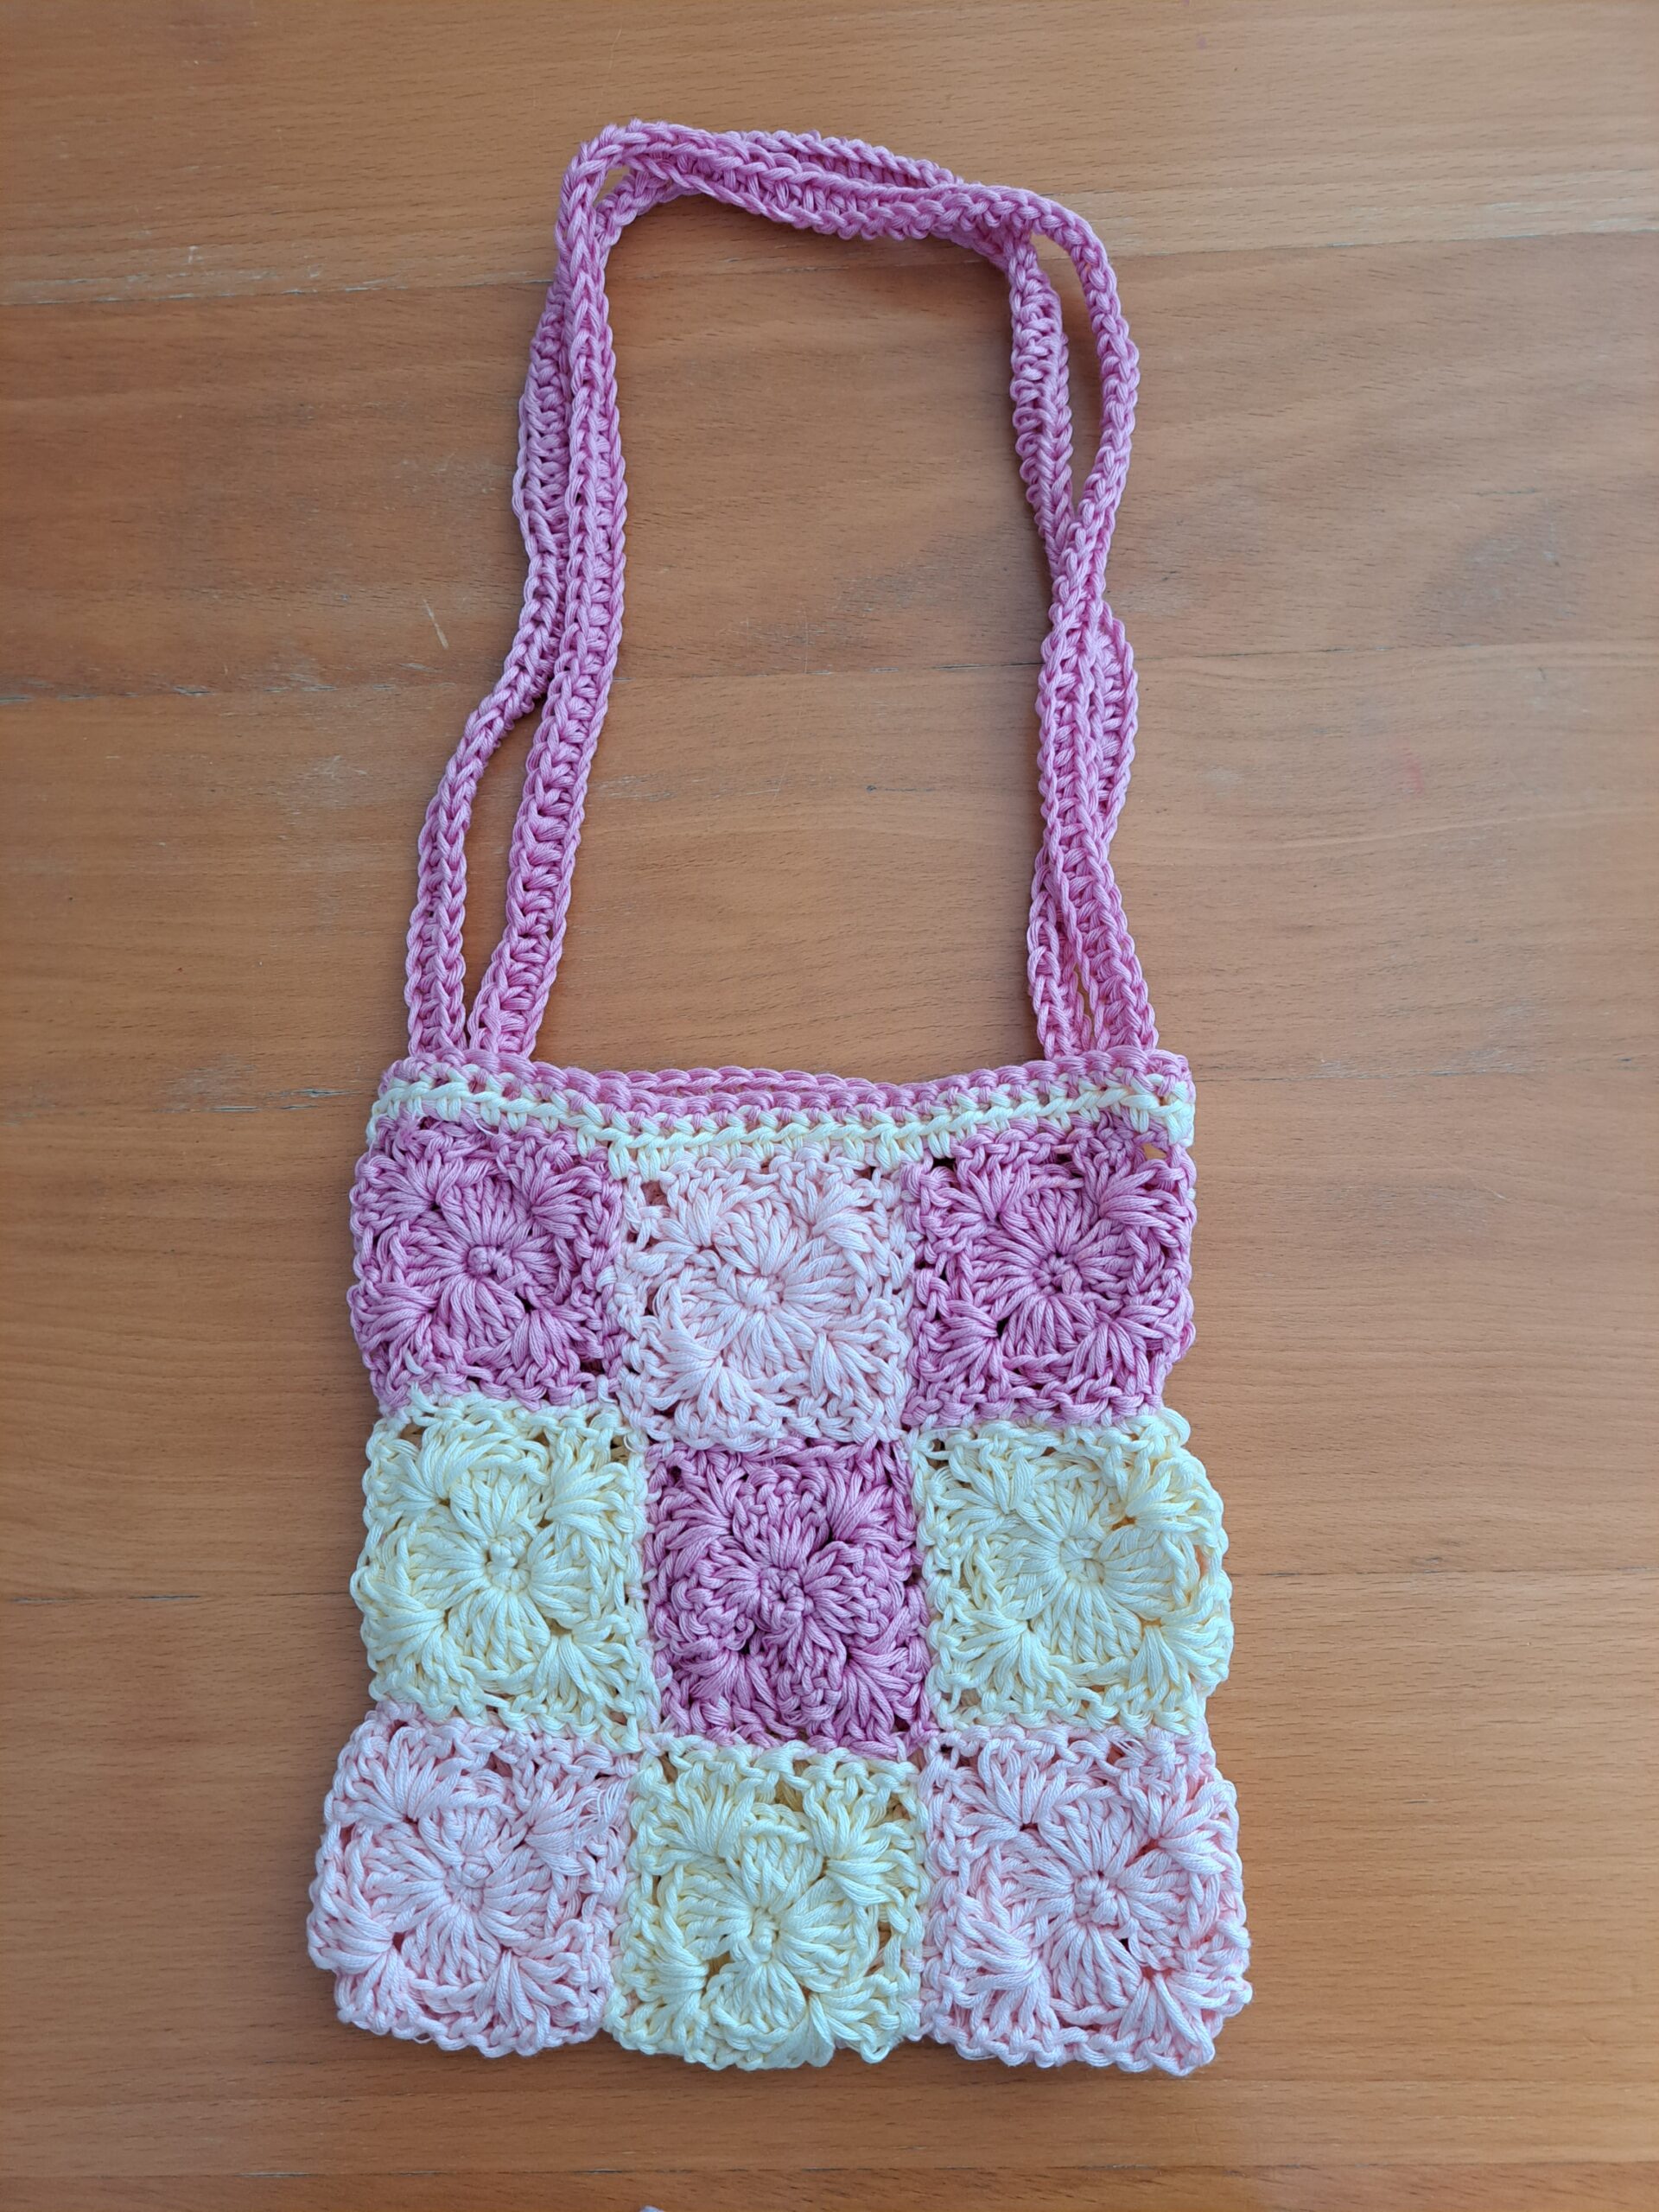 The completed bag